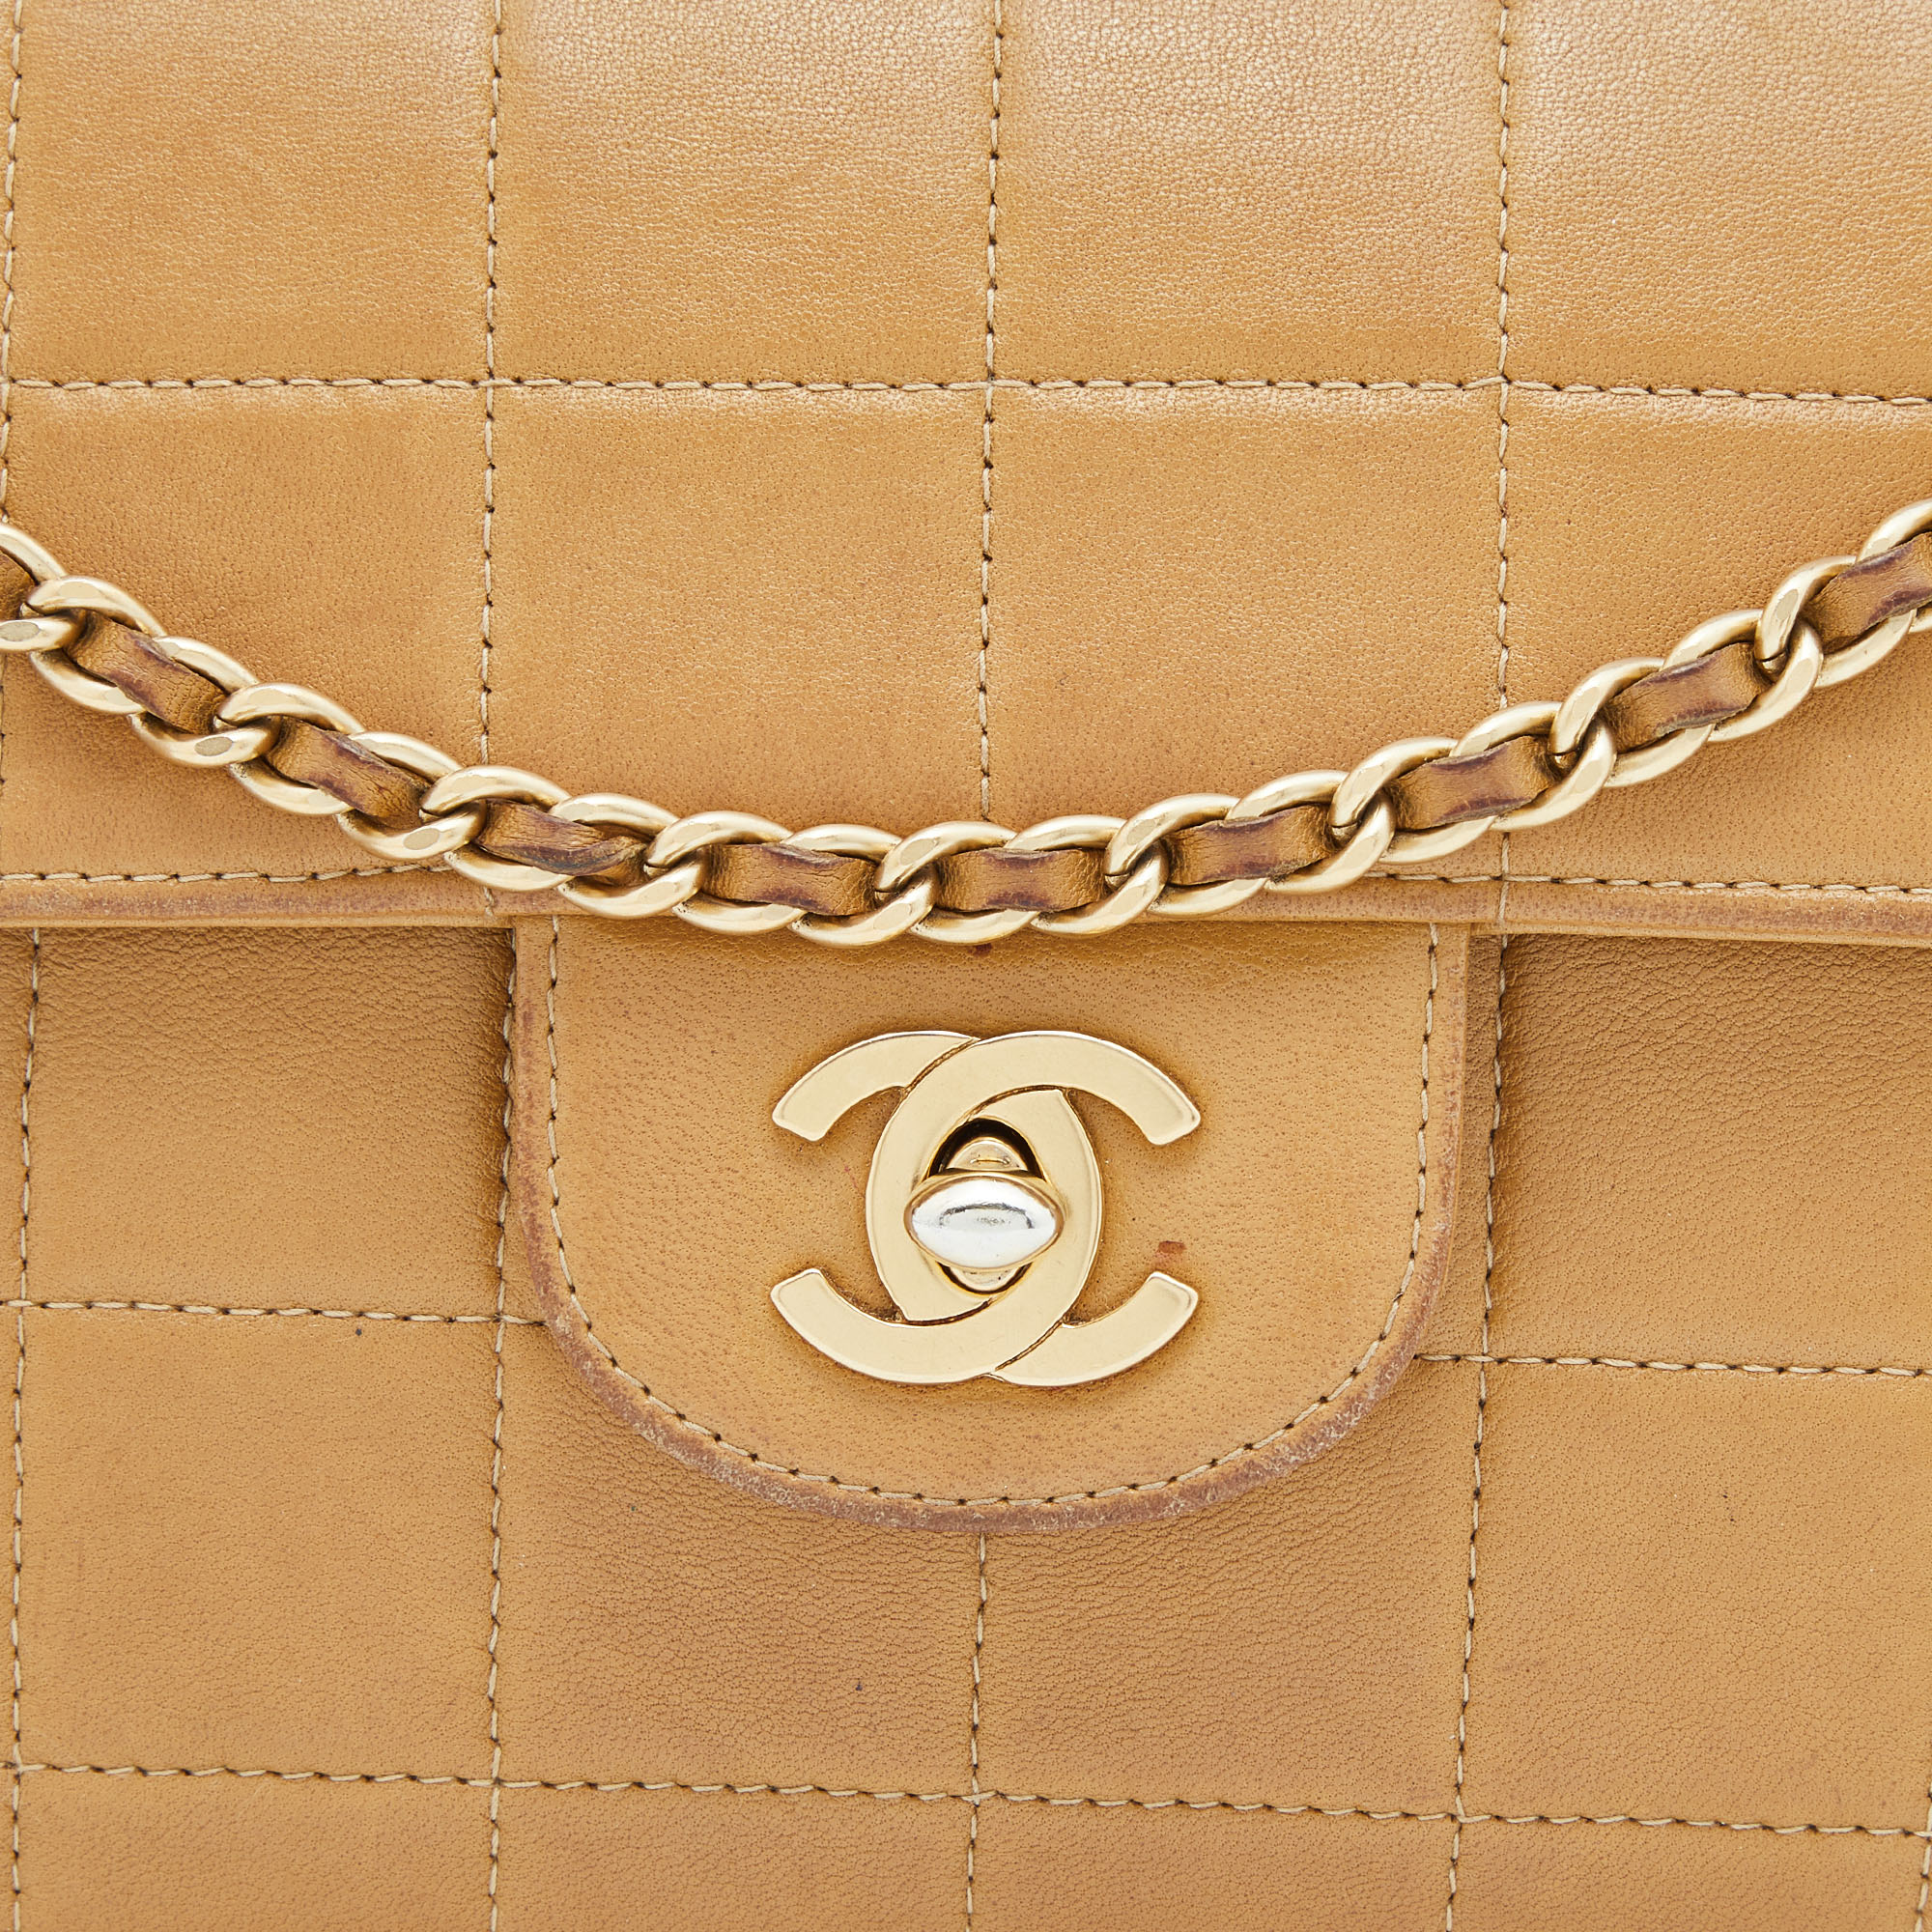 Chanel Beige Chocolate Bar Quilted Leather East West Flap Bag